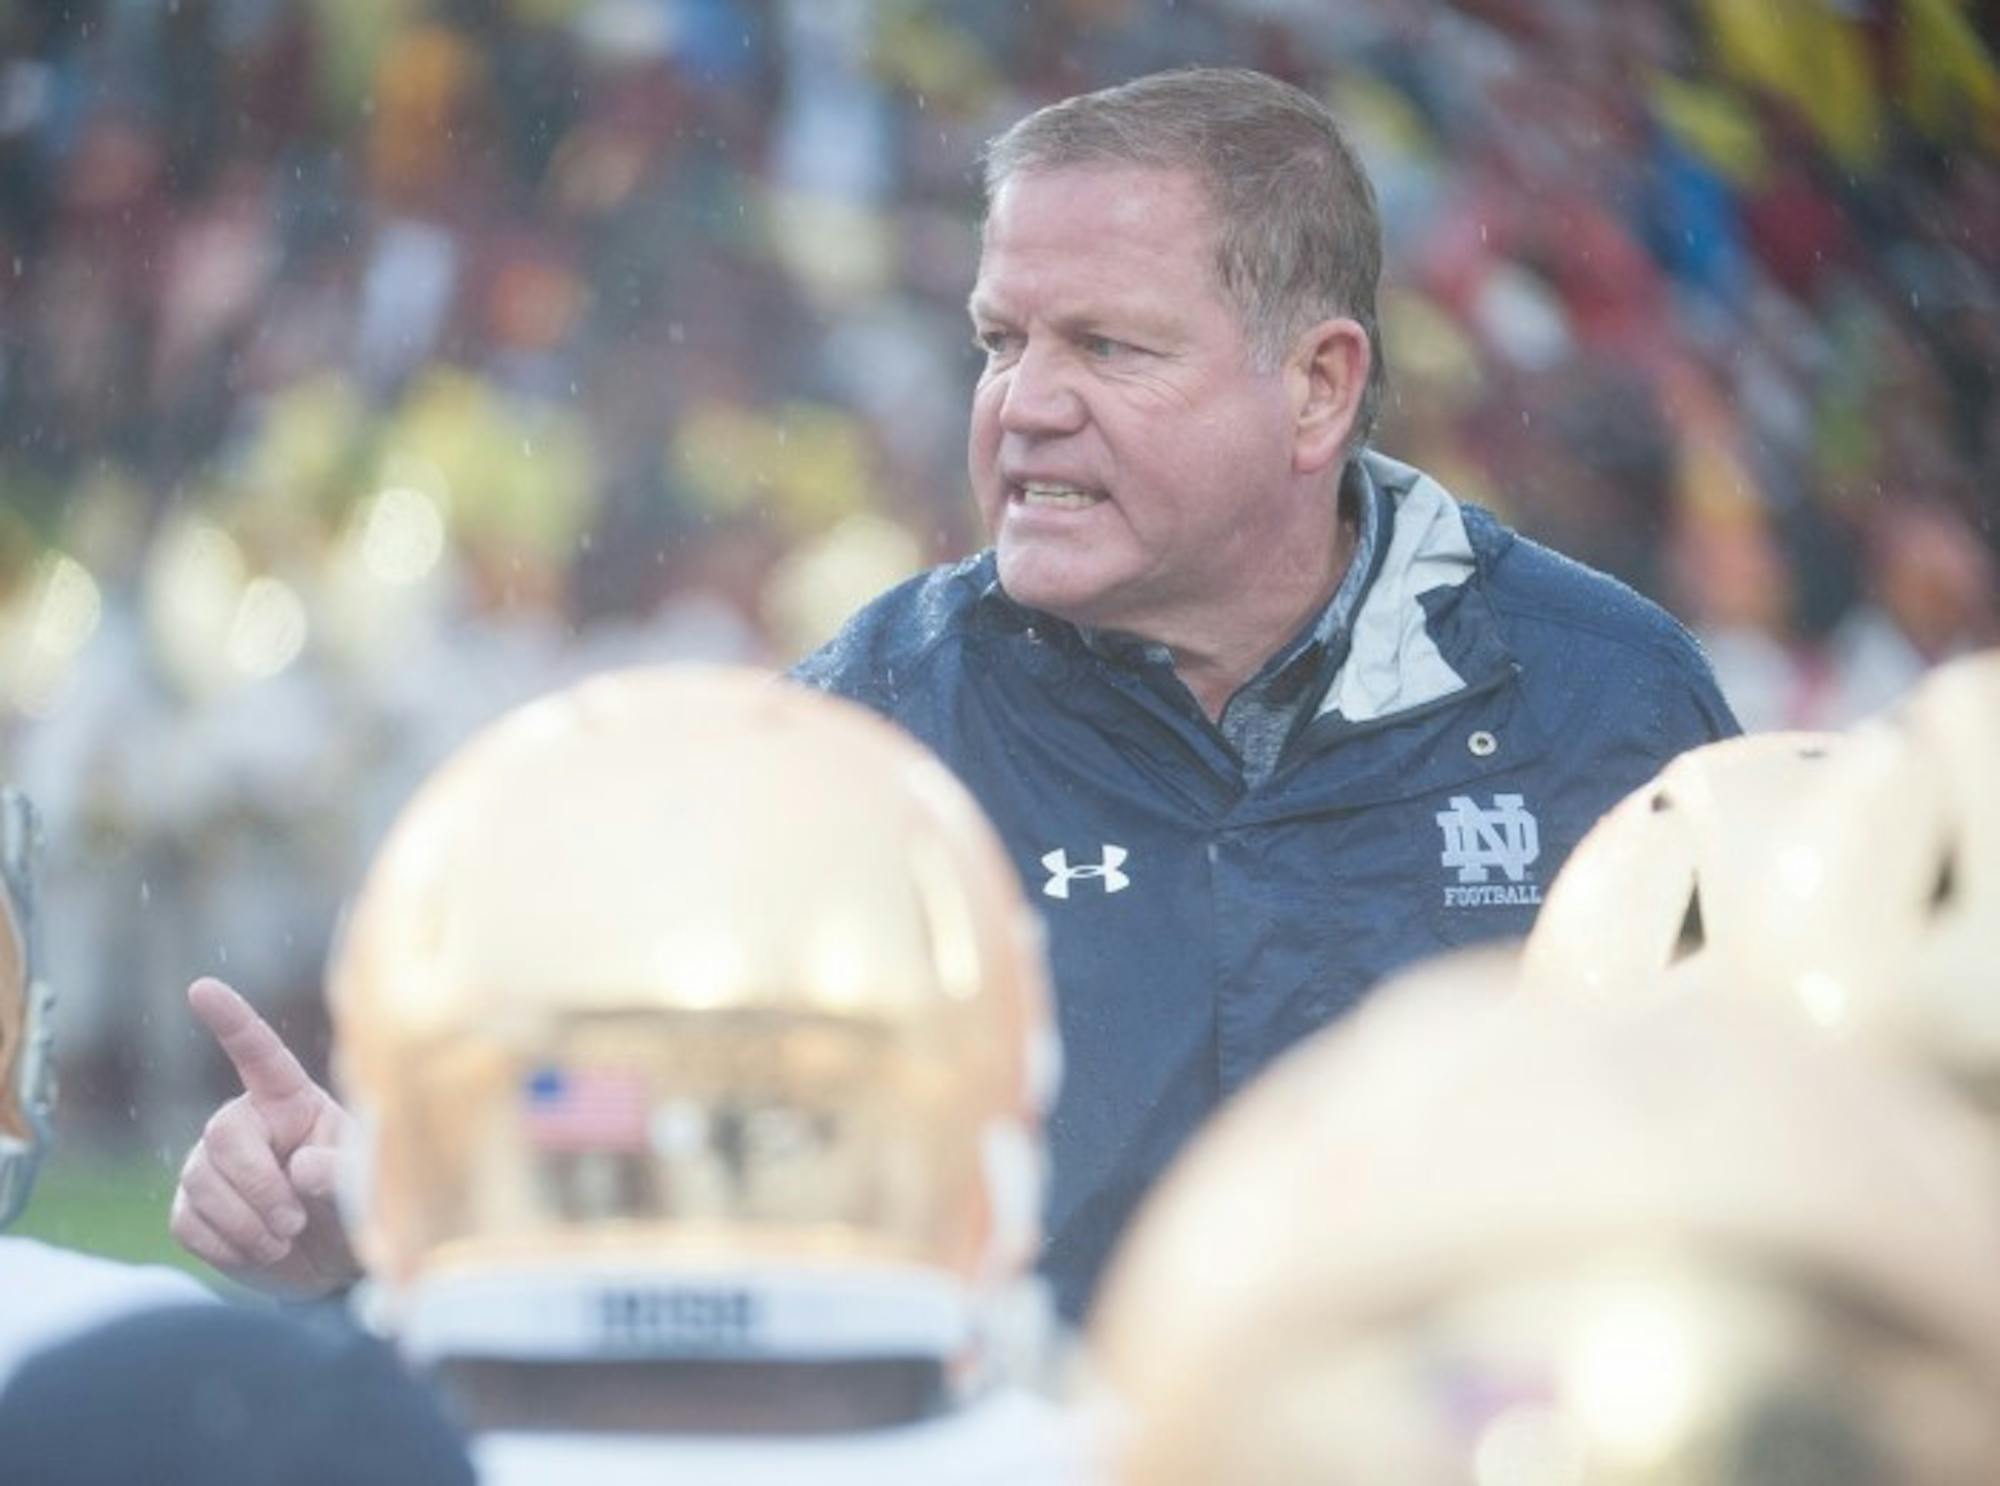 Irish head coach Brian Kelly addresses his team on the field during halftime of Notre Dame’s 45-27 loss against USC in Los Angeles on Nov. 26 at the Los Angeles Memorial Coliseum.